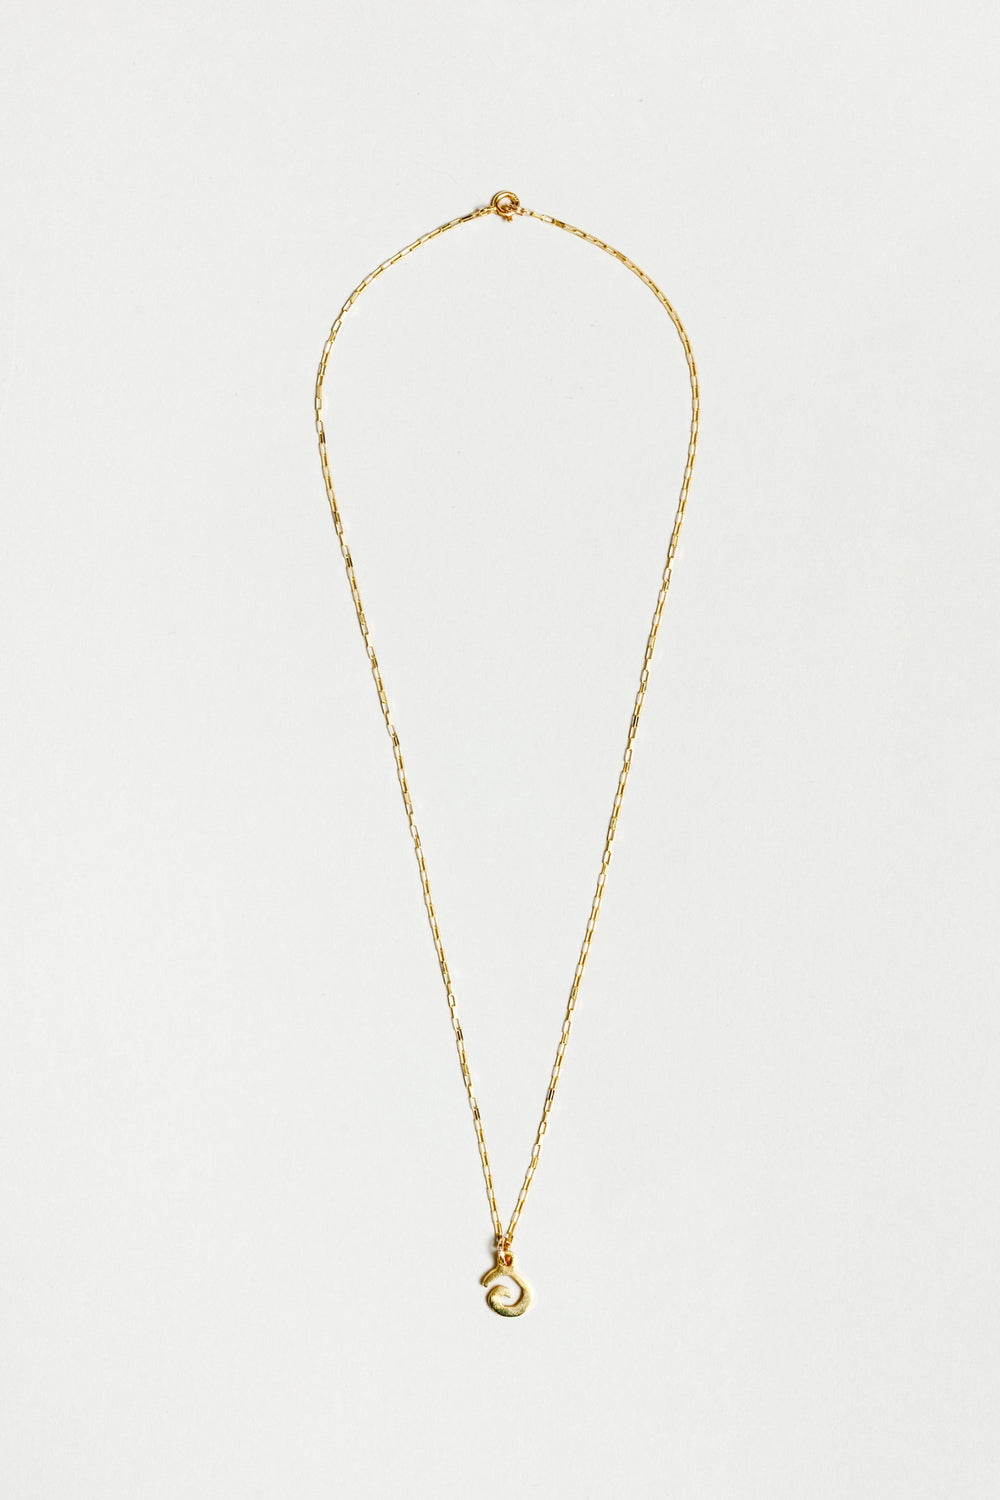 Gold Charm Swirl Necklace